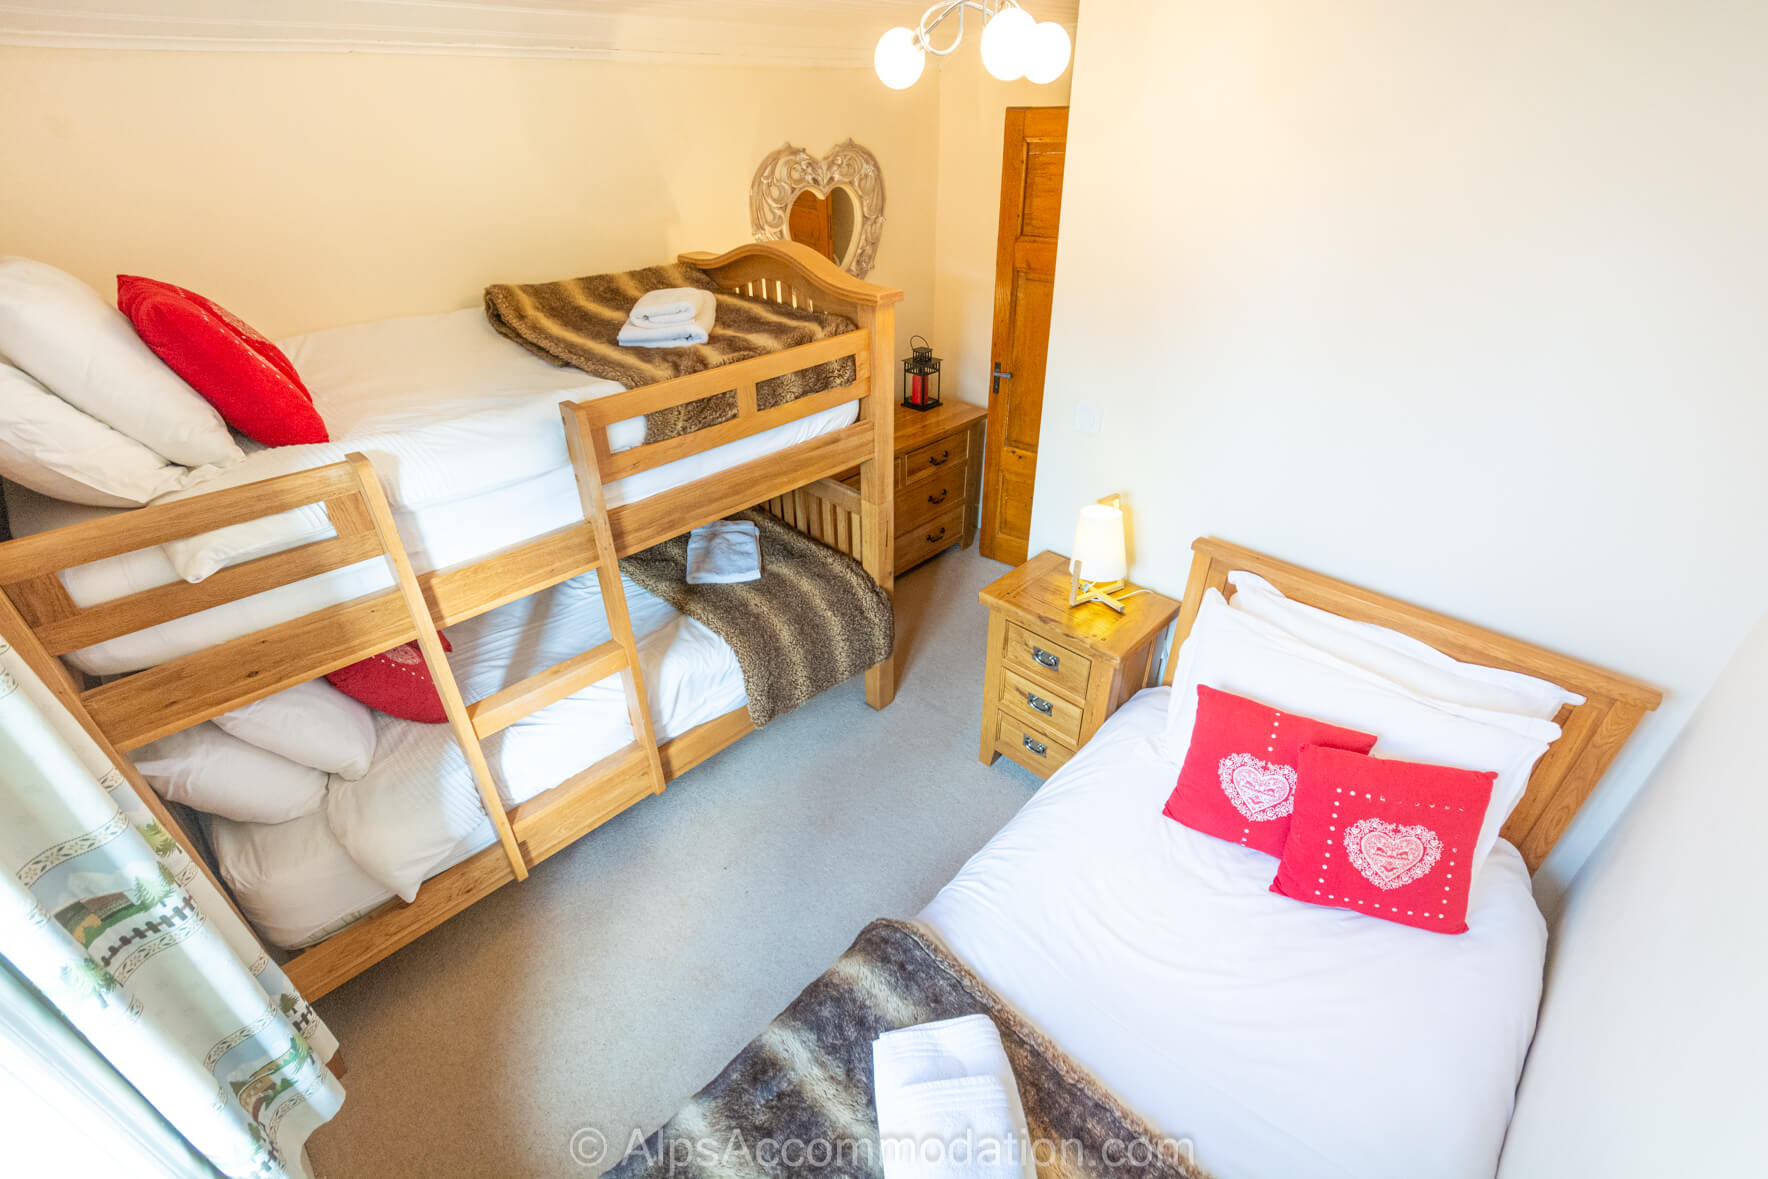 Chalet Chamoissière Samoëns - The triple room with full size bunk beds is ideal for kids and adults alike